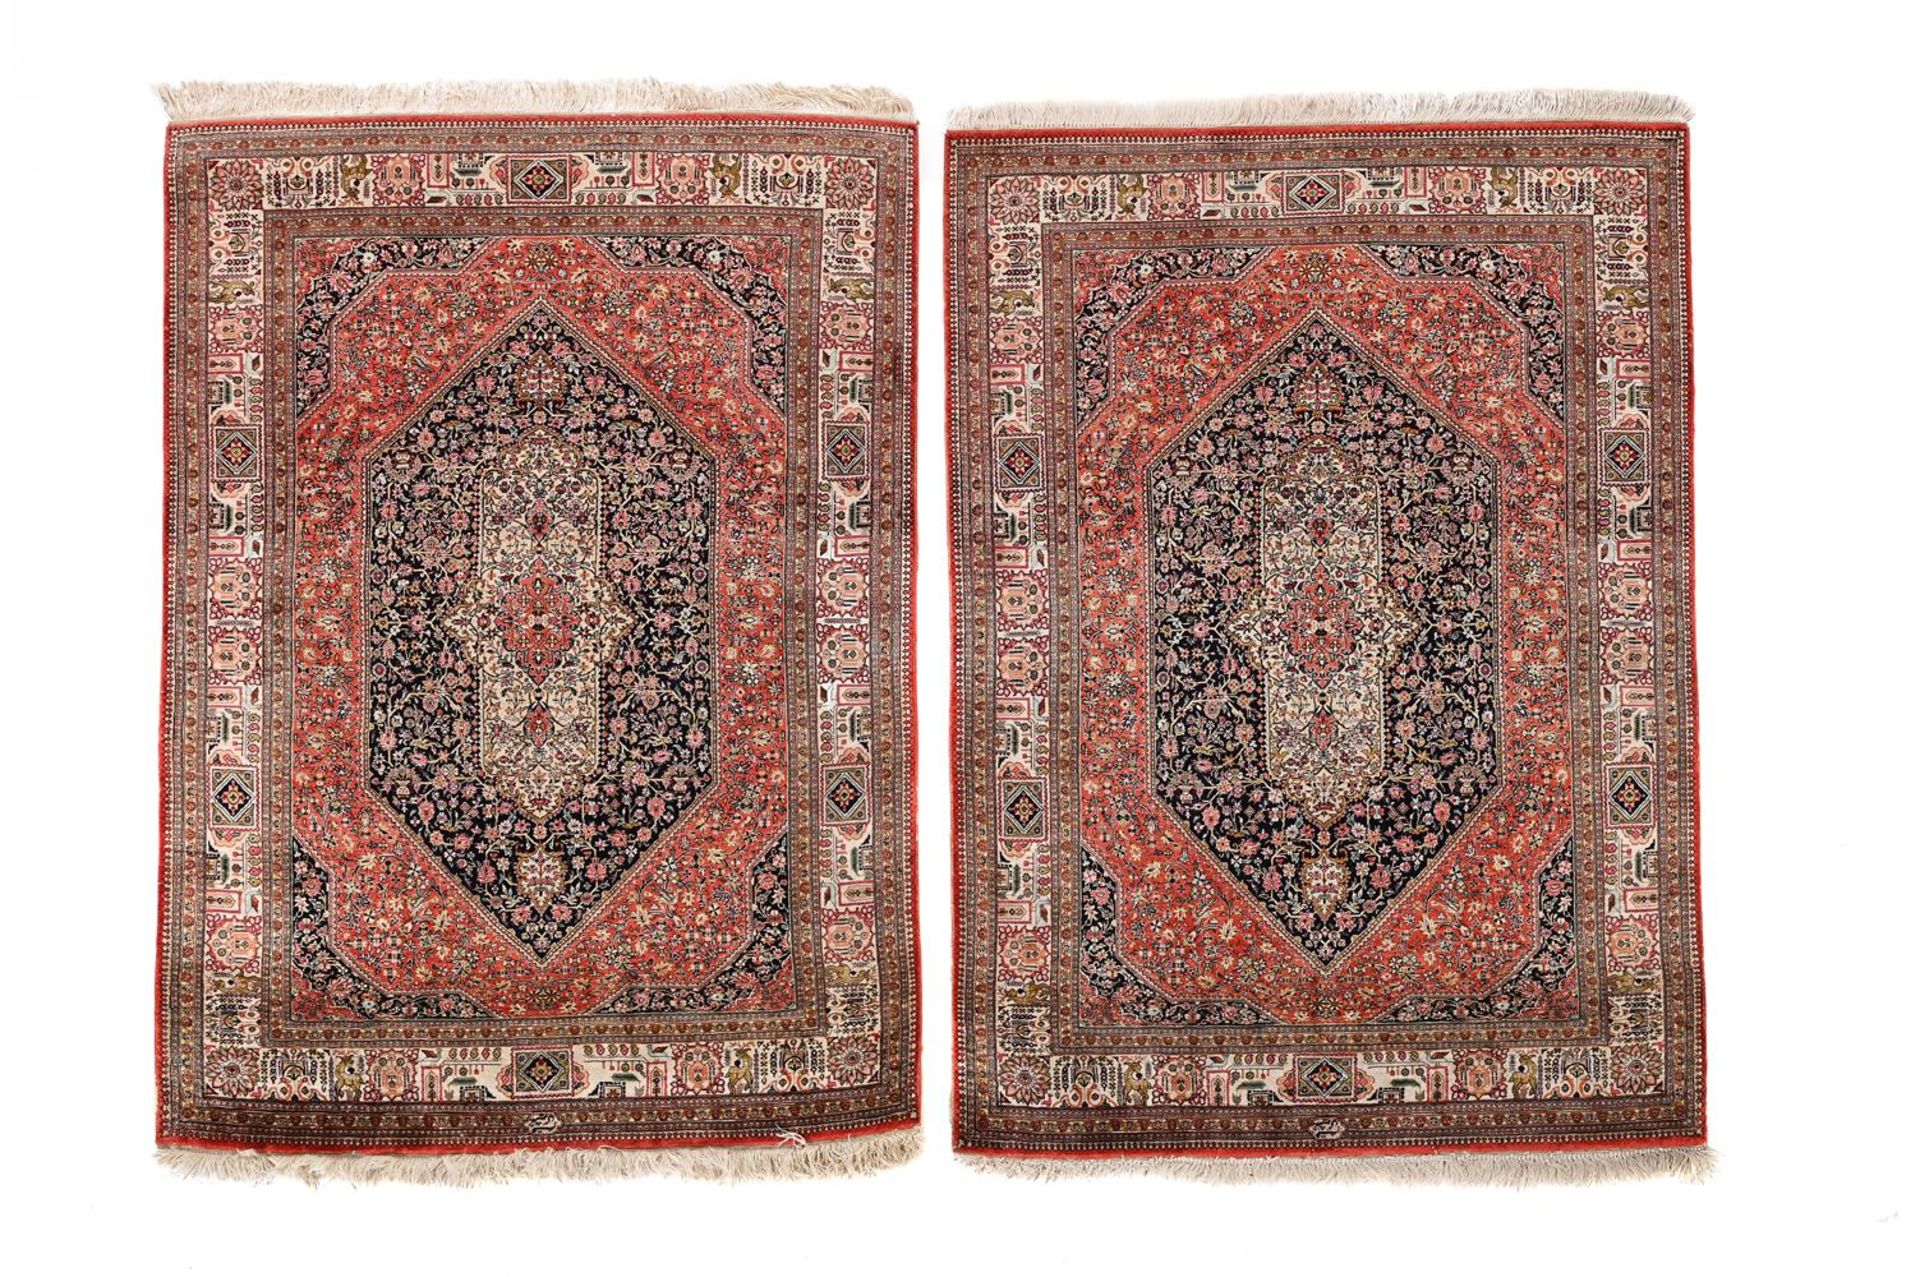 A PAIR OF PART SILK RUGS, IN PERSIAN STYLE